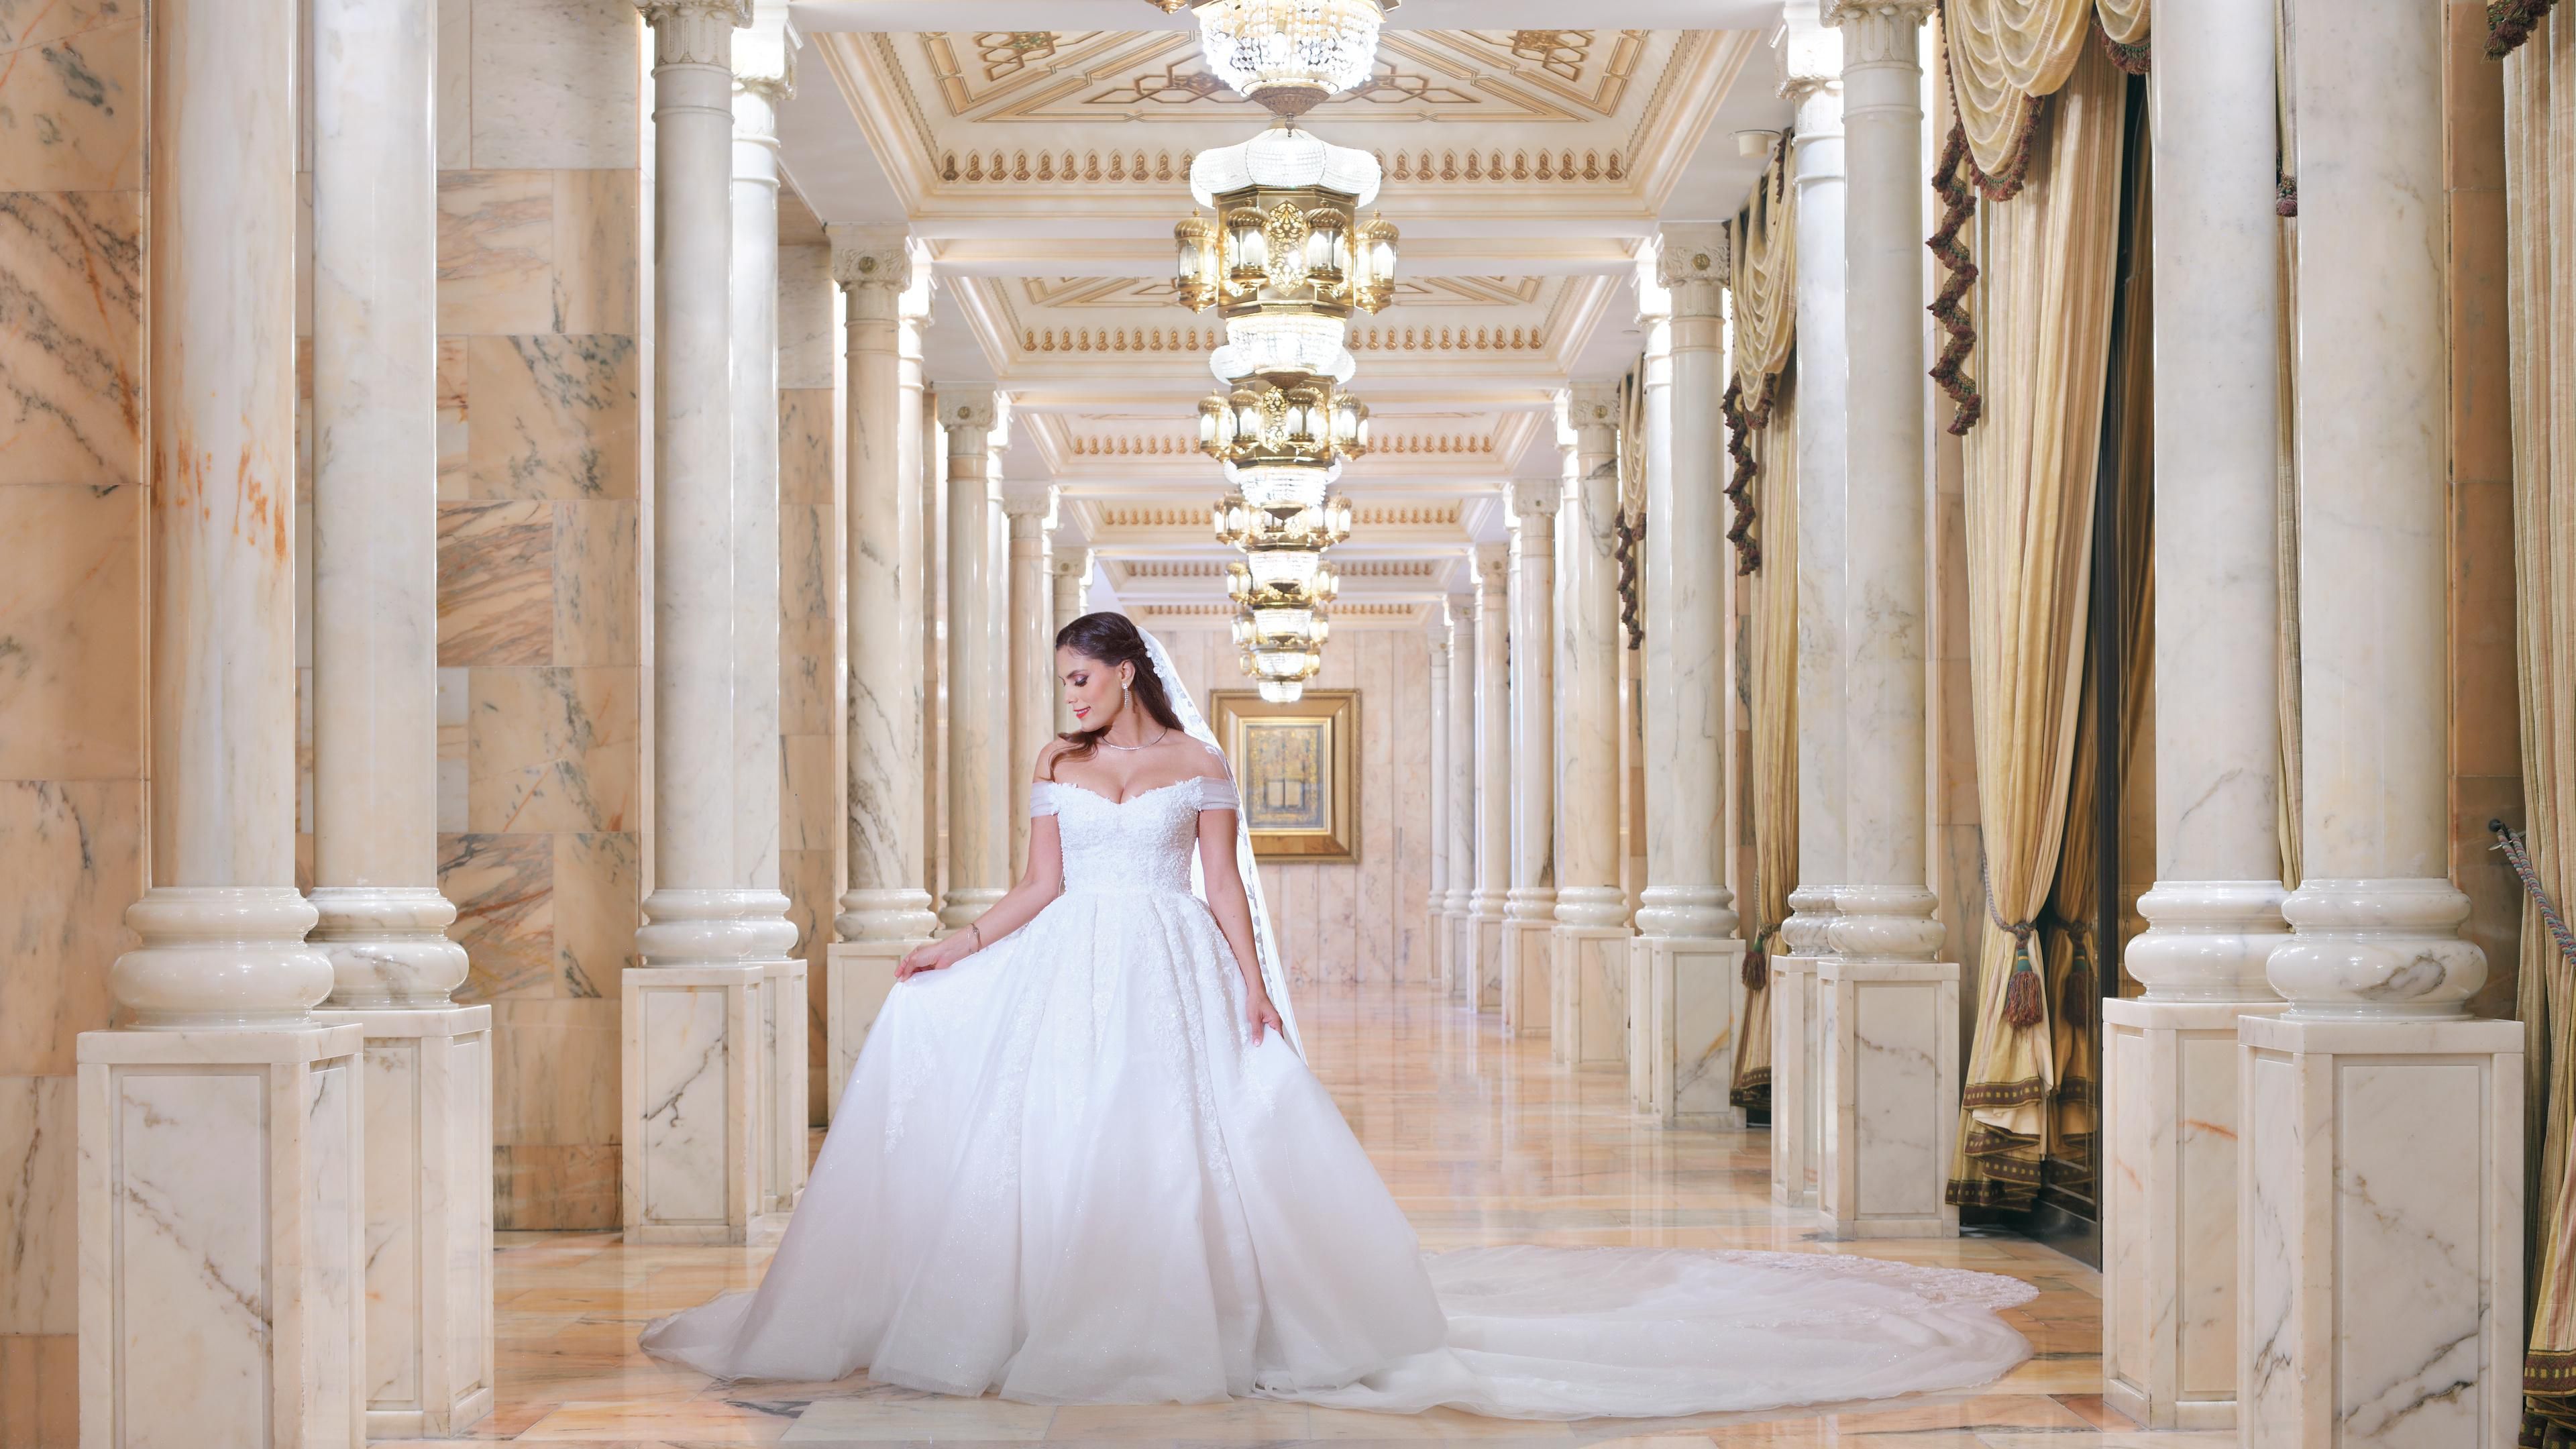 Elevate Your Wedding to Glamorous Heights